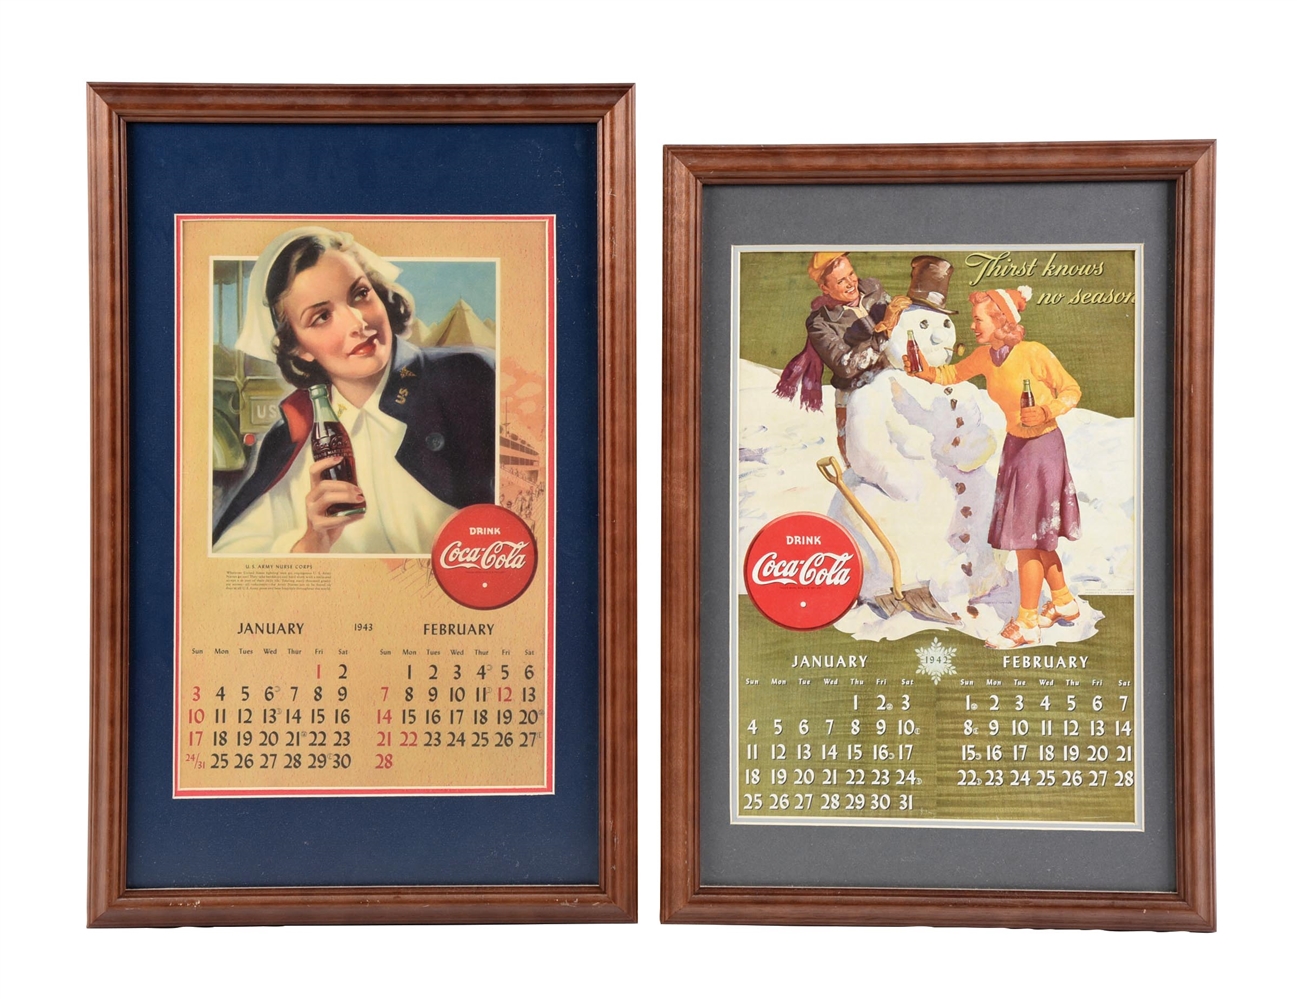 COLLECTION OF 2 "DRINK COCA-COLA" PAPER LITHOGRAPHED CALENDARS